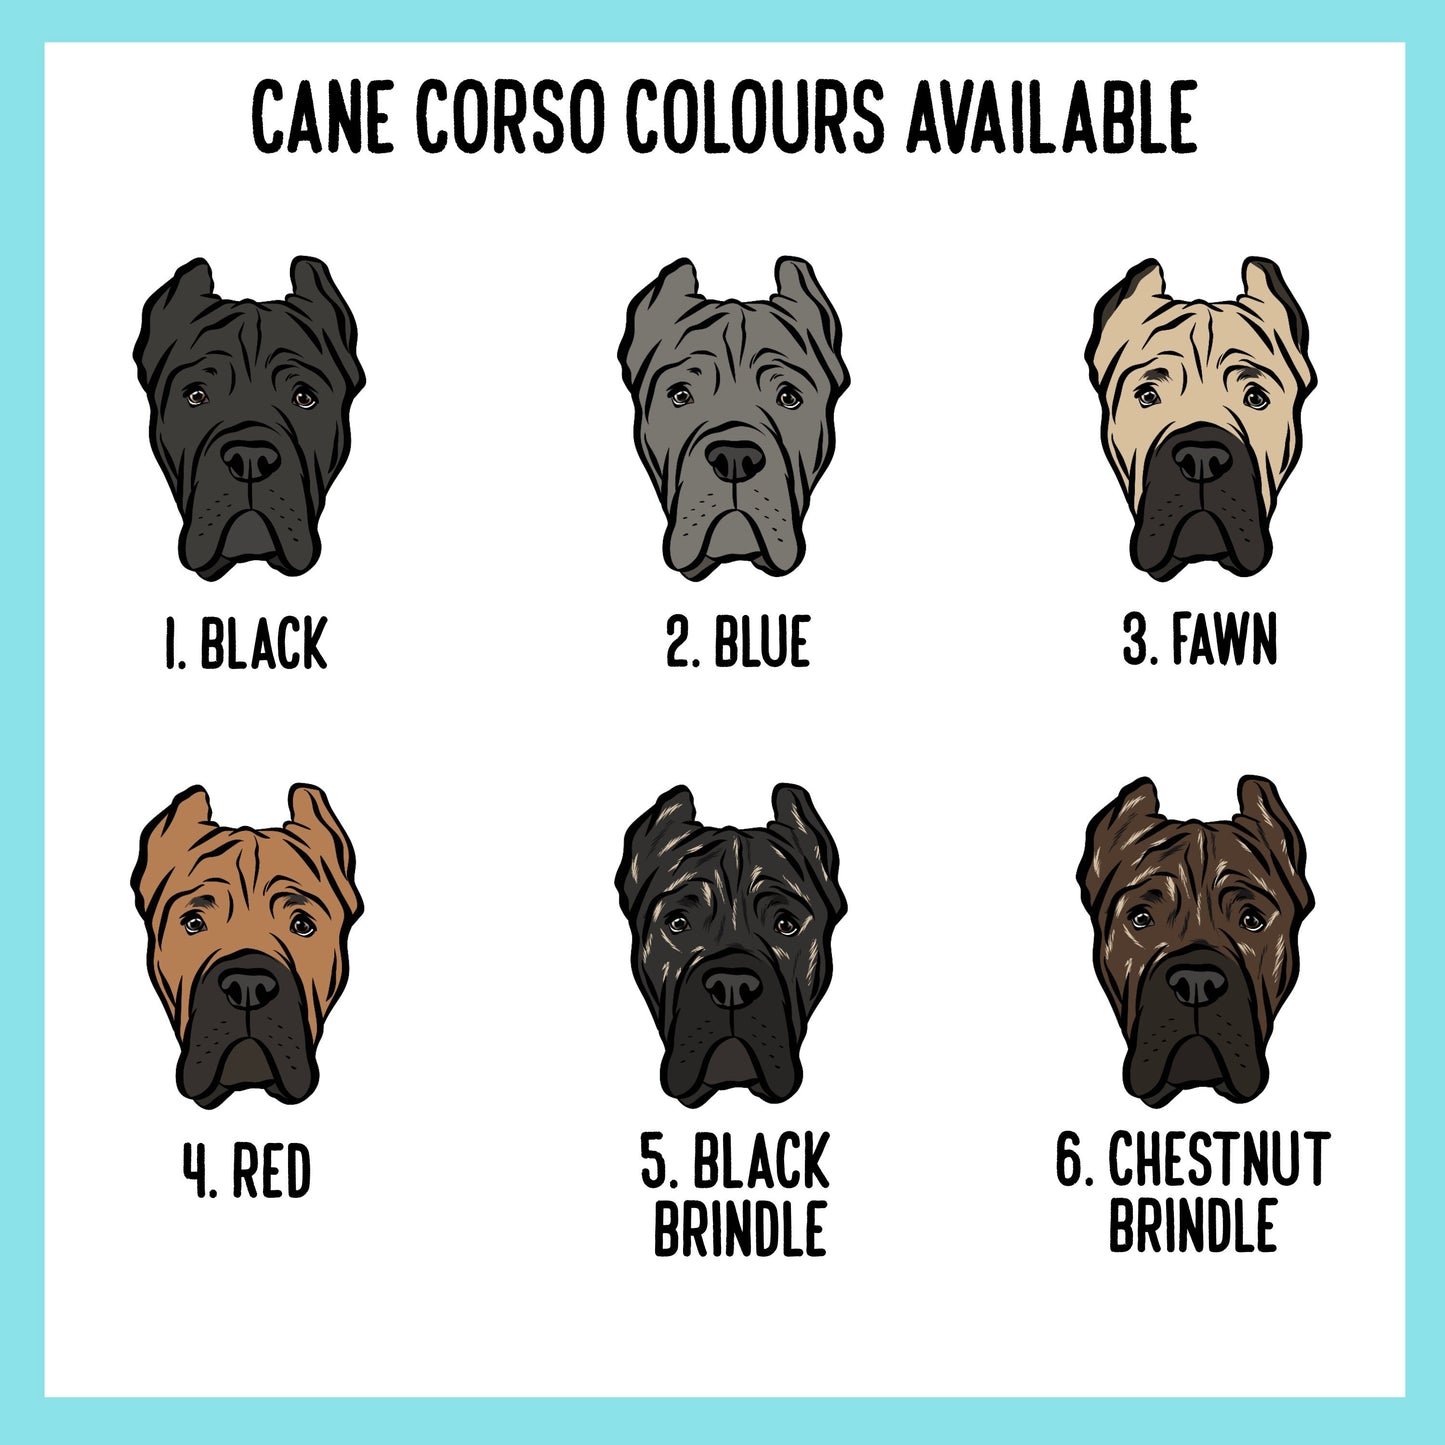 Cane Corso Christmas Card/ Personalised Large Dog Breed Greeting Card Design/ Custom Cane Corso Merry Christmas Card/ Dog Owner Card Gift